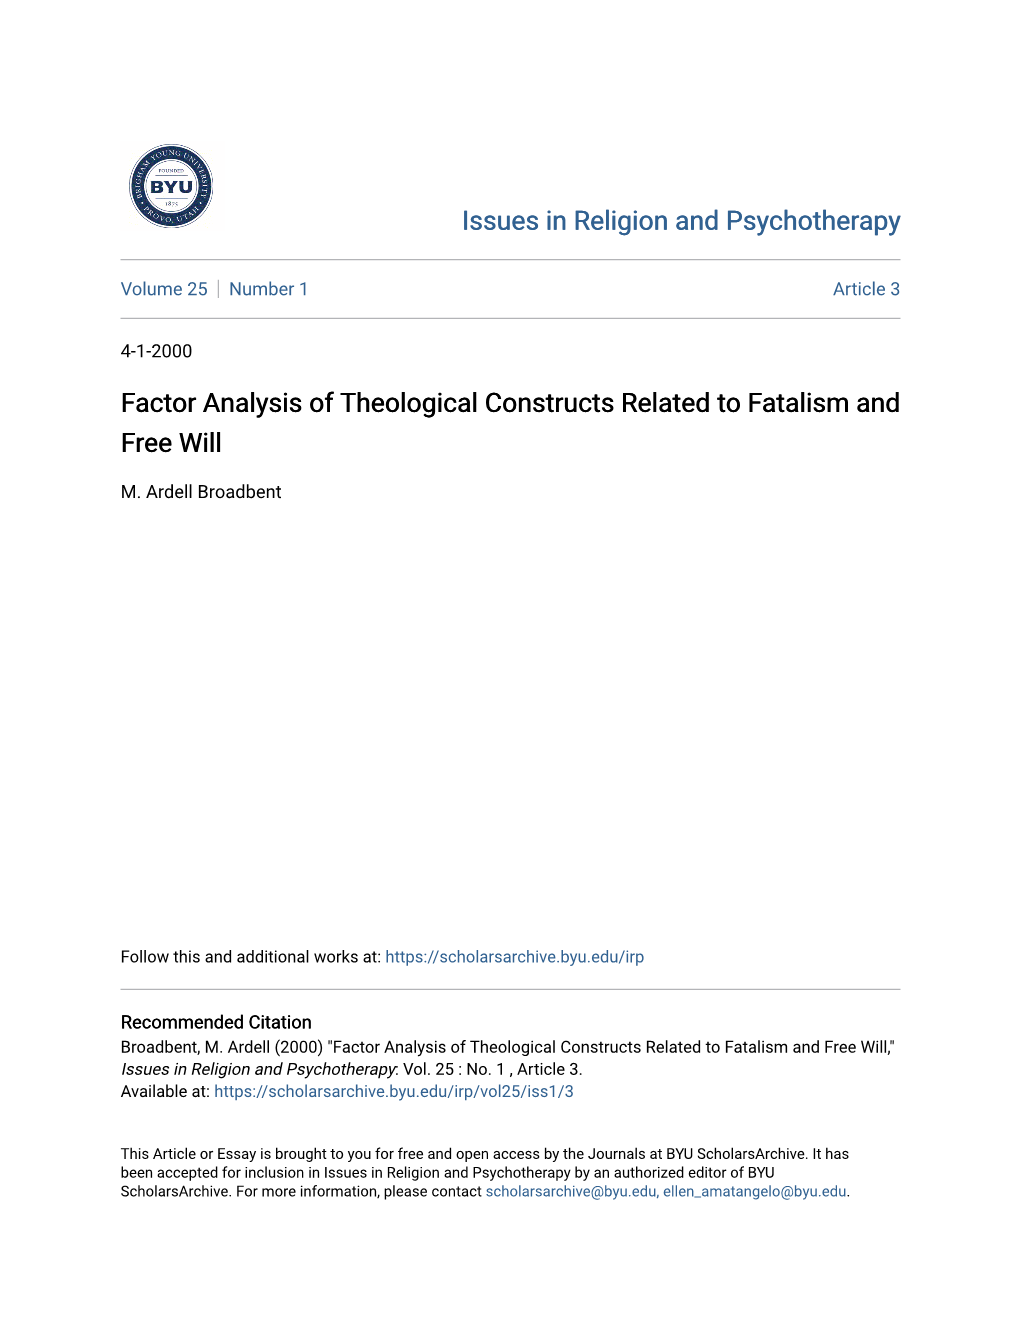 Factor Analysis of Theological Constructs Related to Fatalism and Free Will